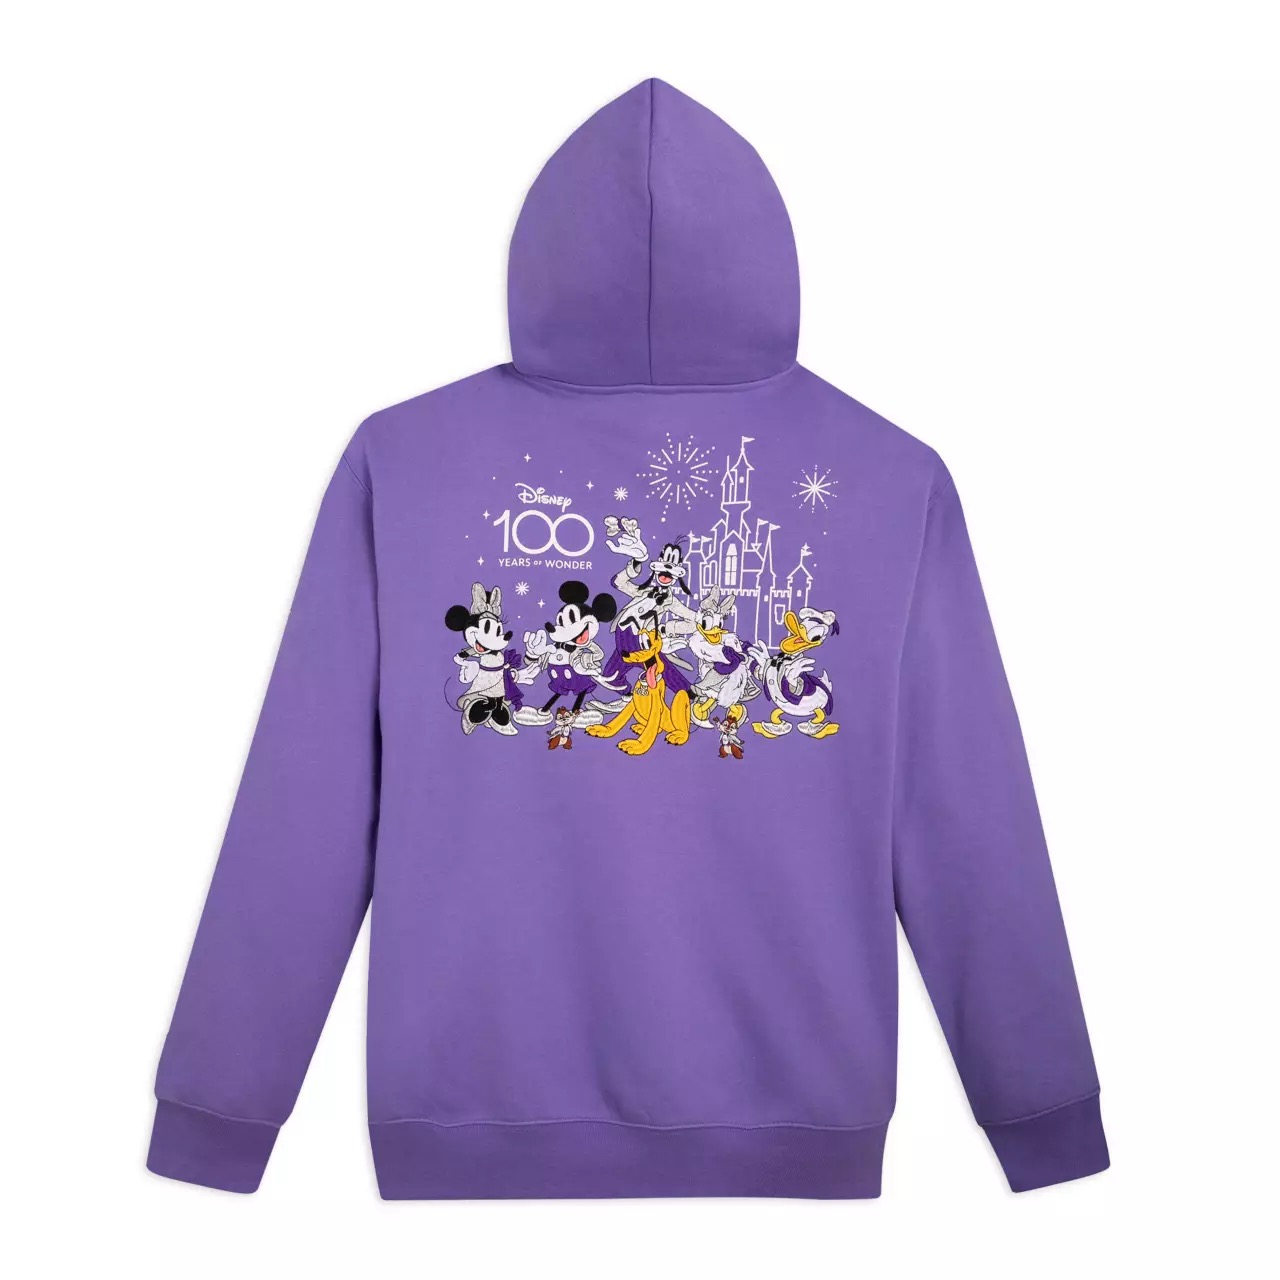 ACT FAST Disney’s First 100th Anniversary Collection Is Online NOW